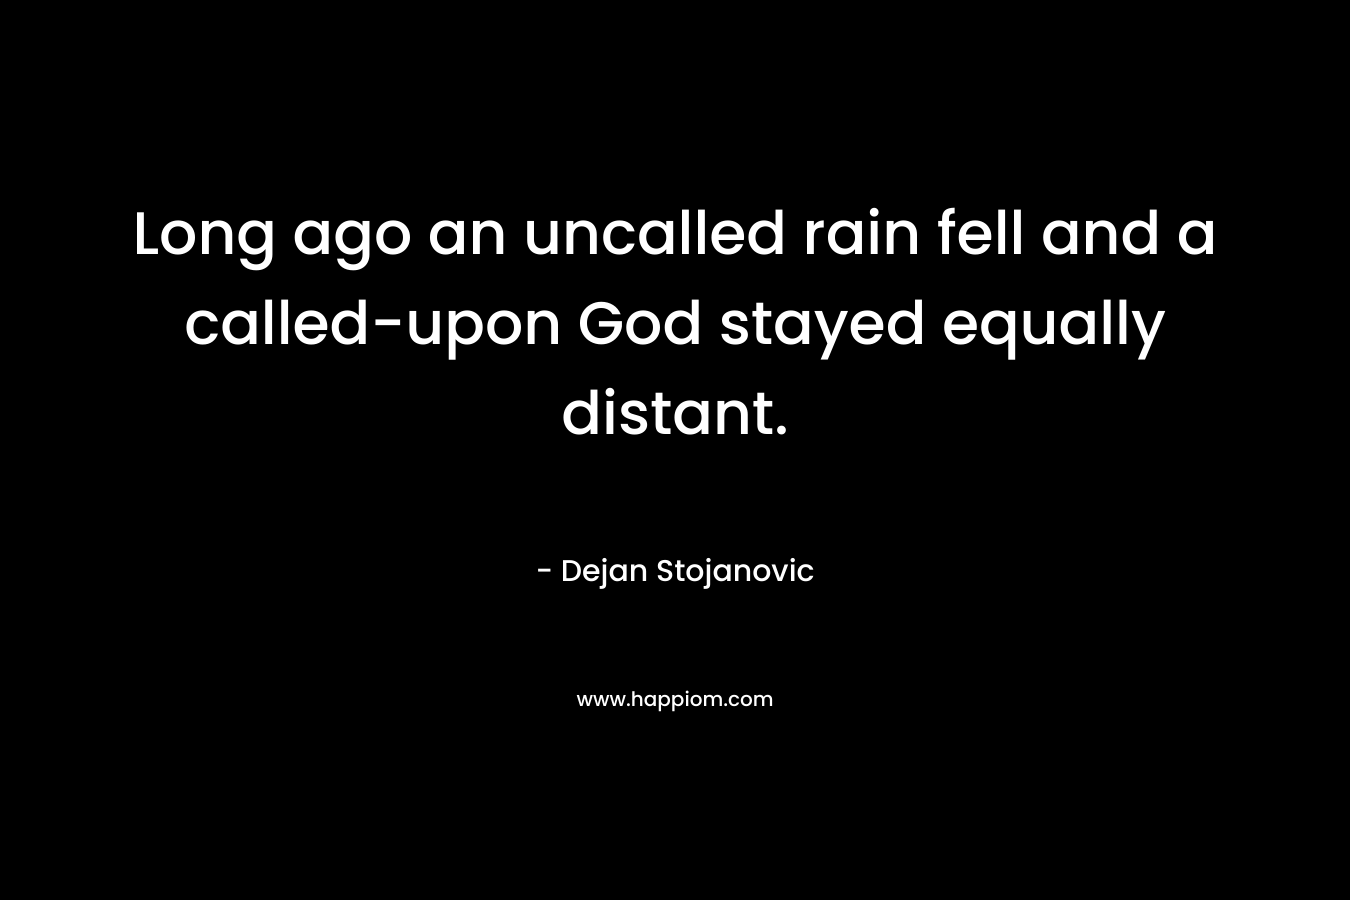 Long ago an uncalled rain fell and a called-upon God stayed equally distant.